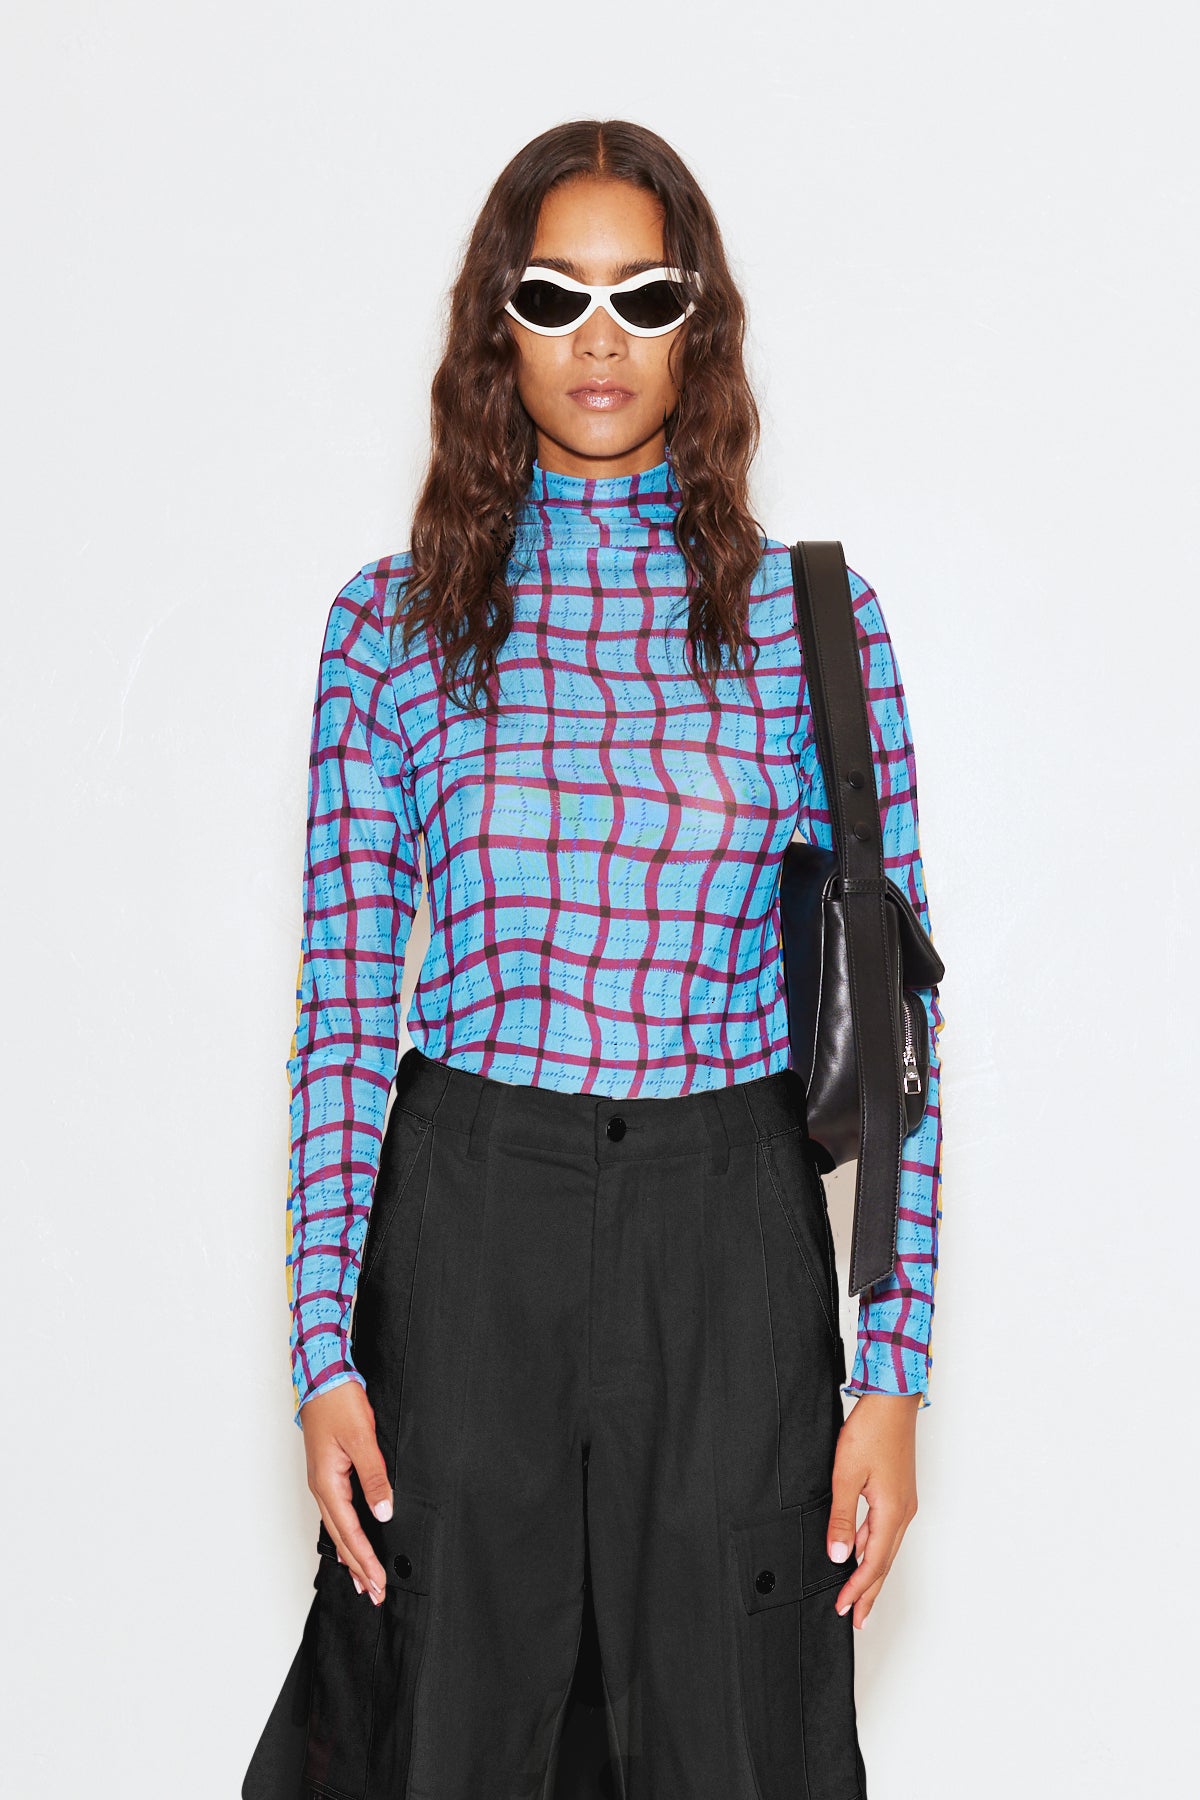 Combo Wendel Top in Blue Yellow Plaid